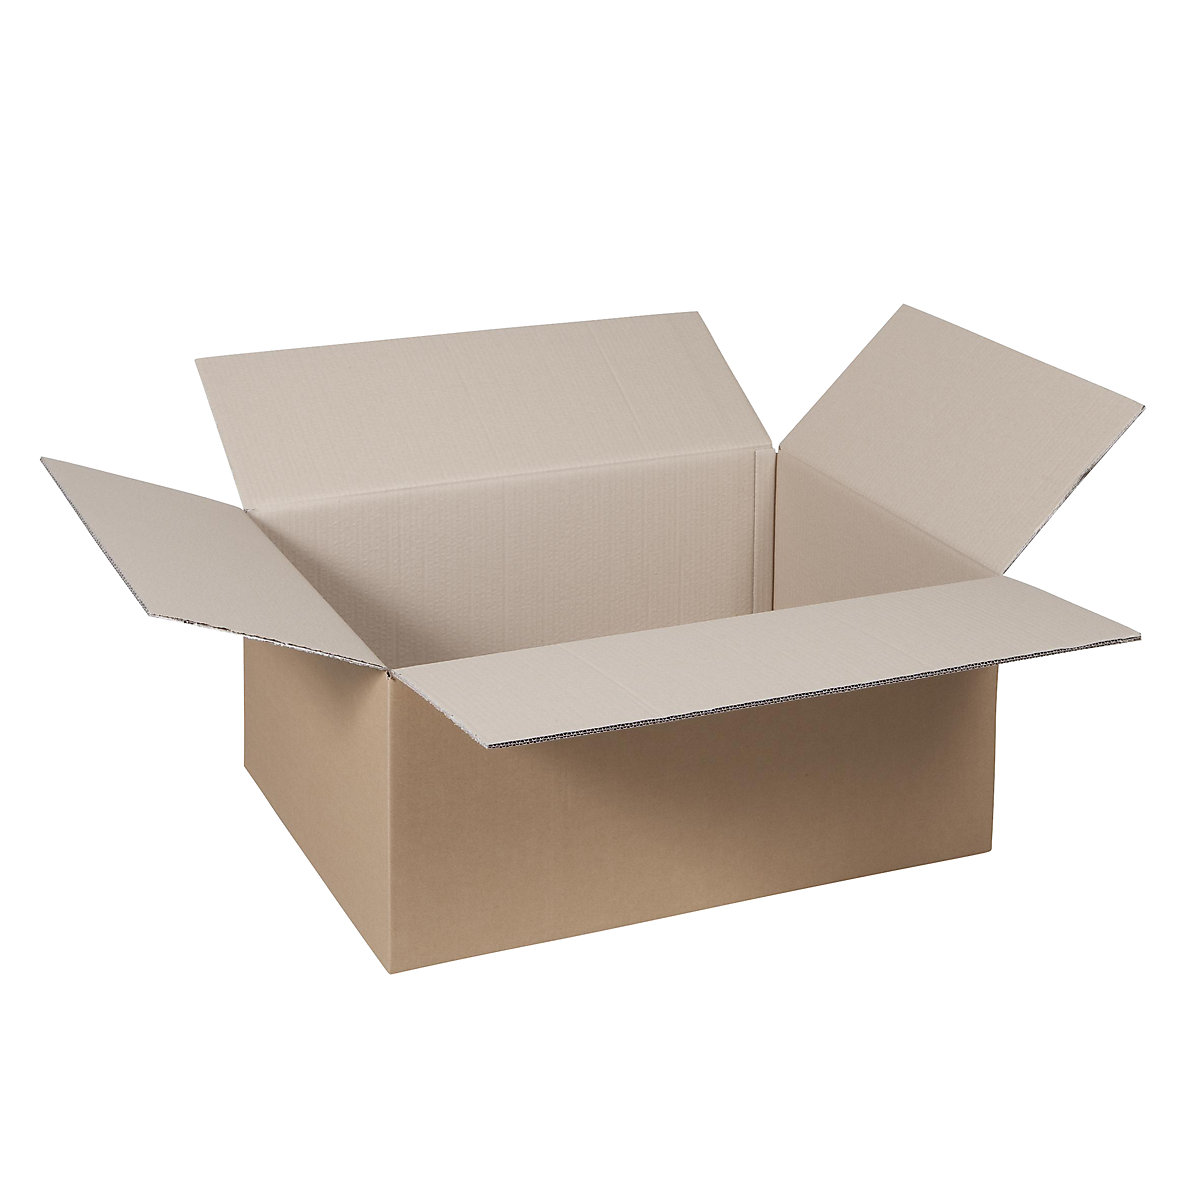 Folding cardboard box, FEFCO 0201, made of double fluted cardboard, internal dimensions 400 x 300 x 200 mm, pack of 100-42